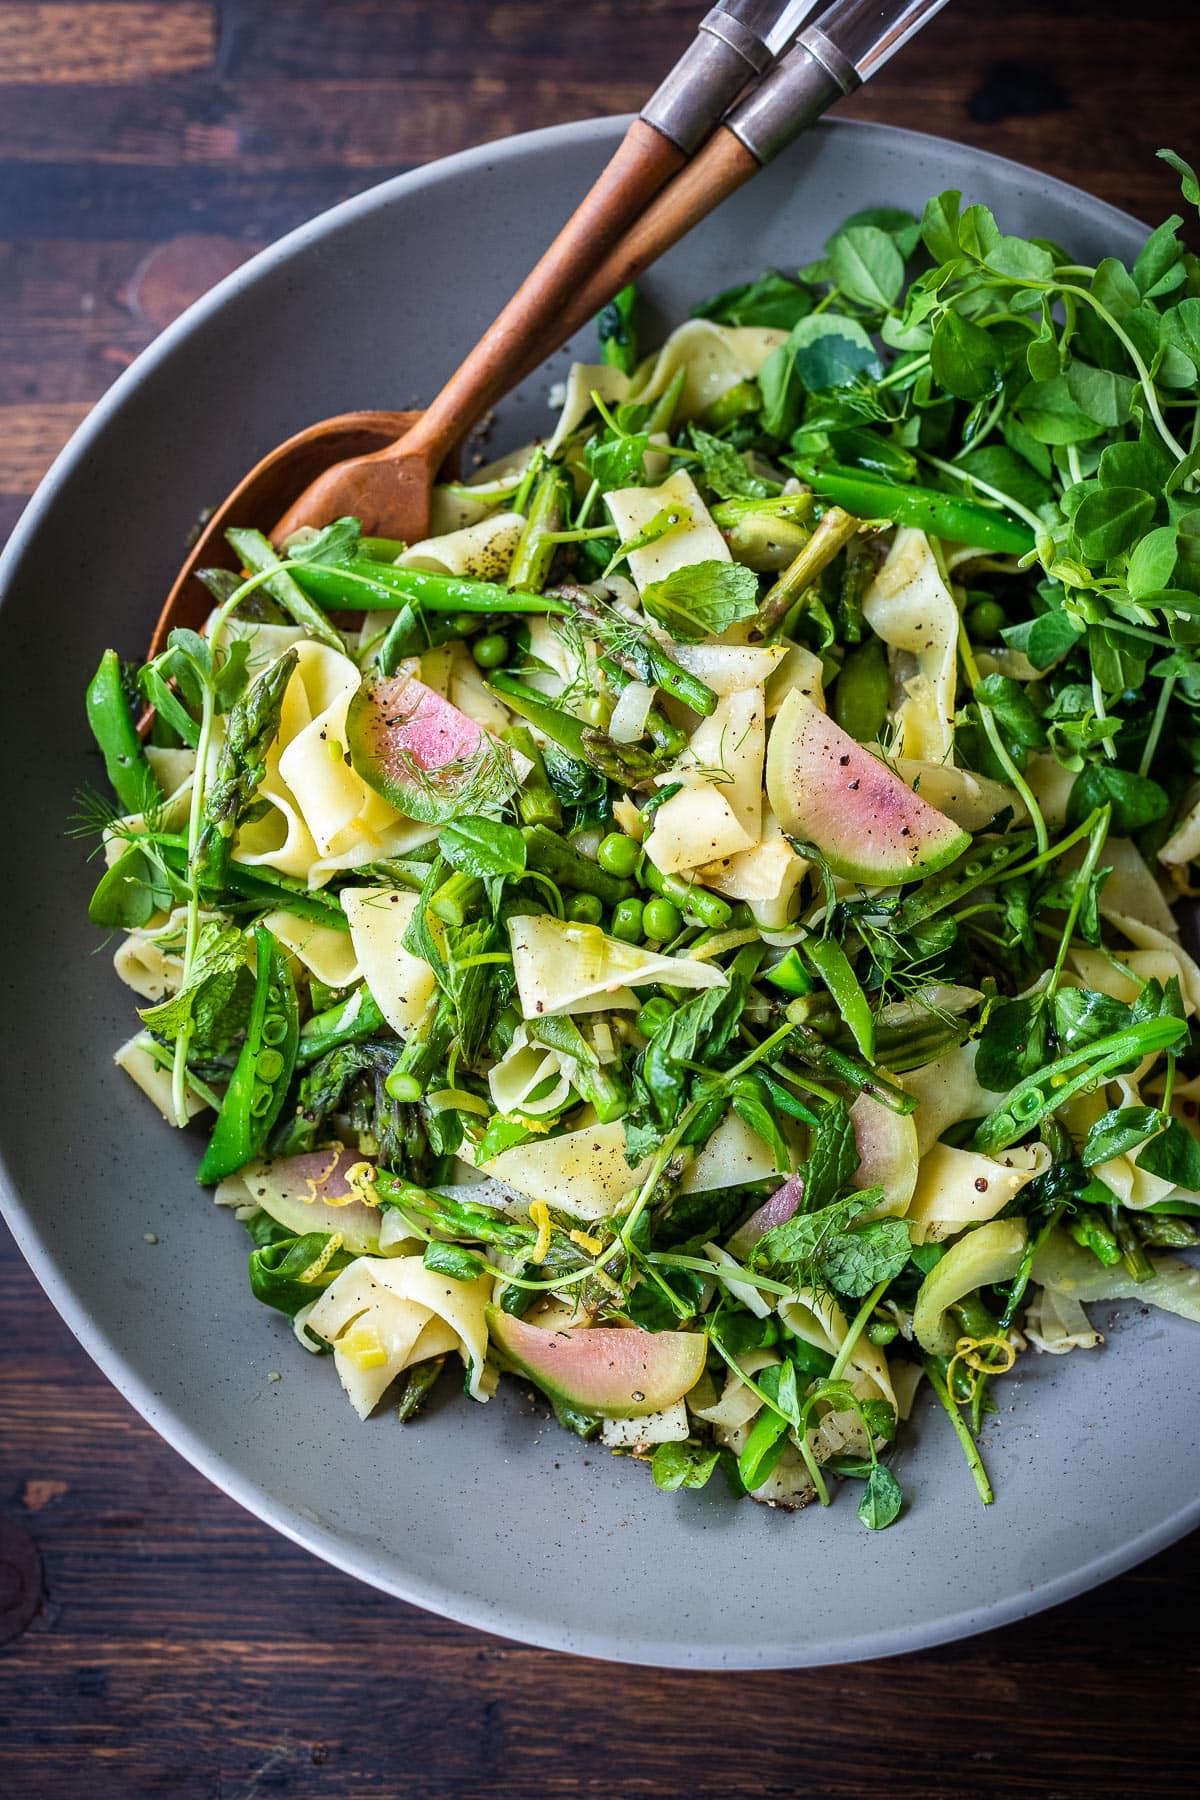 Pasta Primavera or "Spring Pasta" highlights tender spring vegetables-asparagus, peas, leeks and pea shoots, tossed with pappardelle, lemon zest, olive oil and spring herbs.